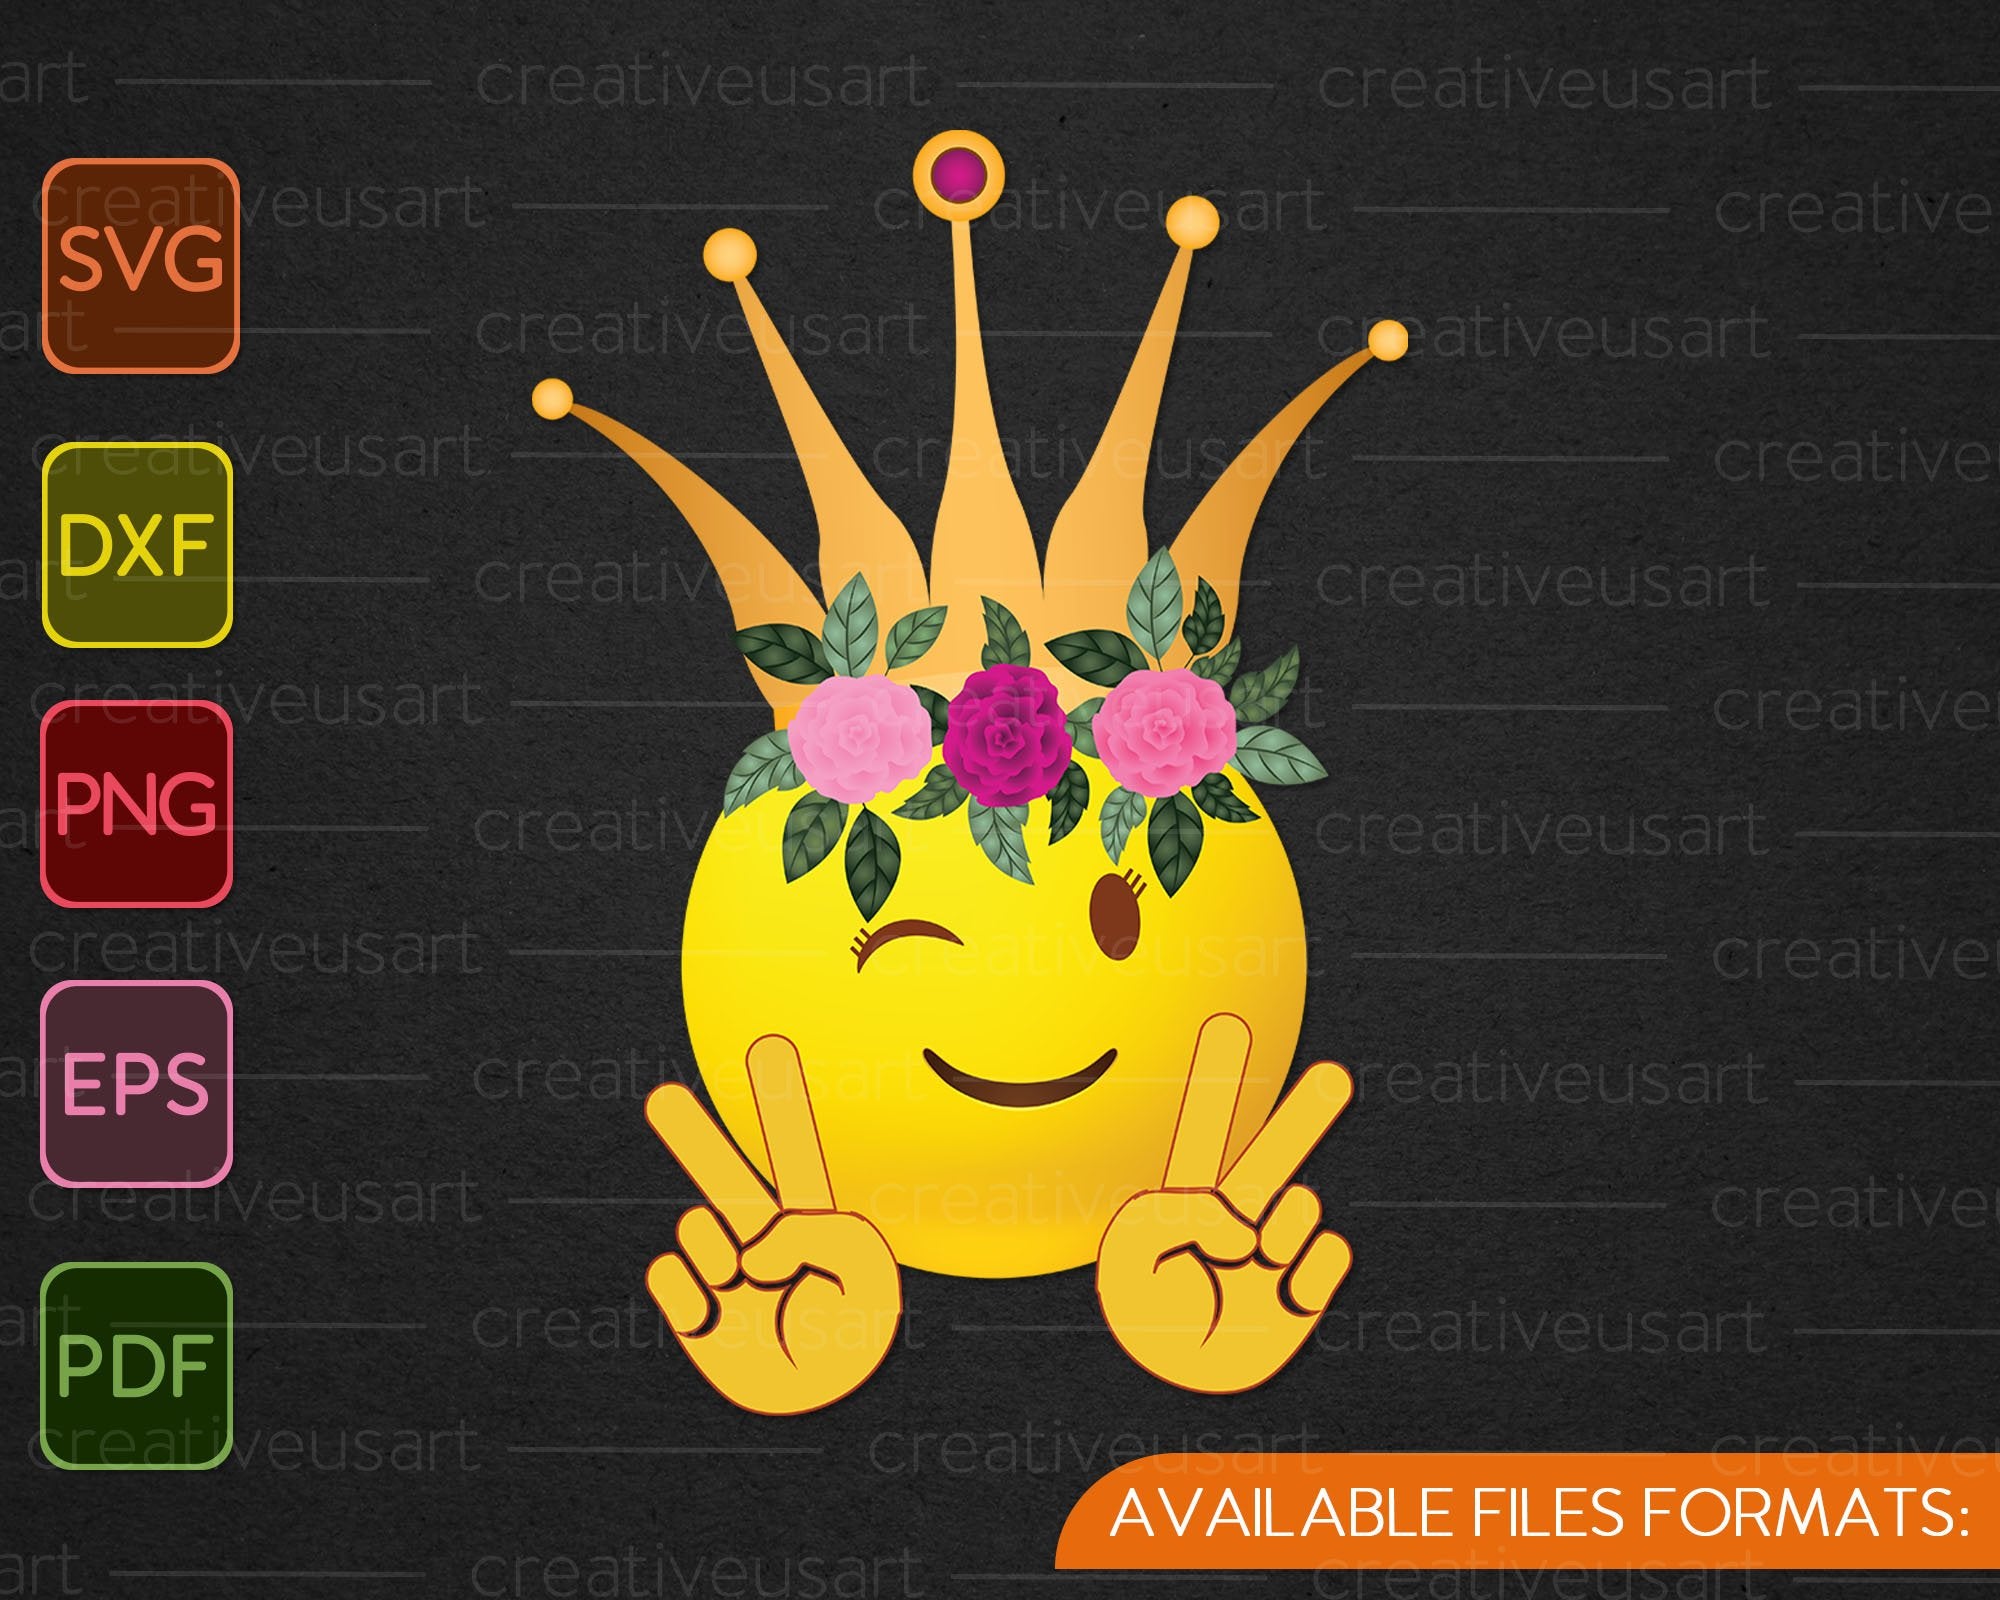 Download Hippie Flower Power Crown Peace Smiley Emoji Svg Png Files Creativeusarts